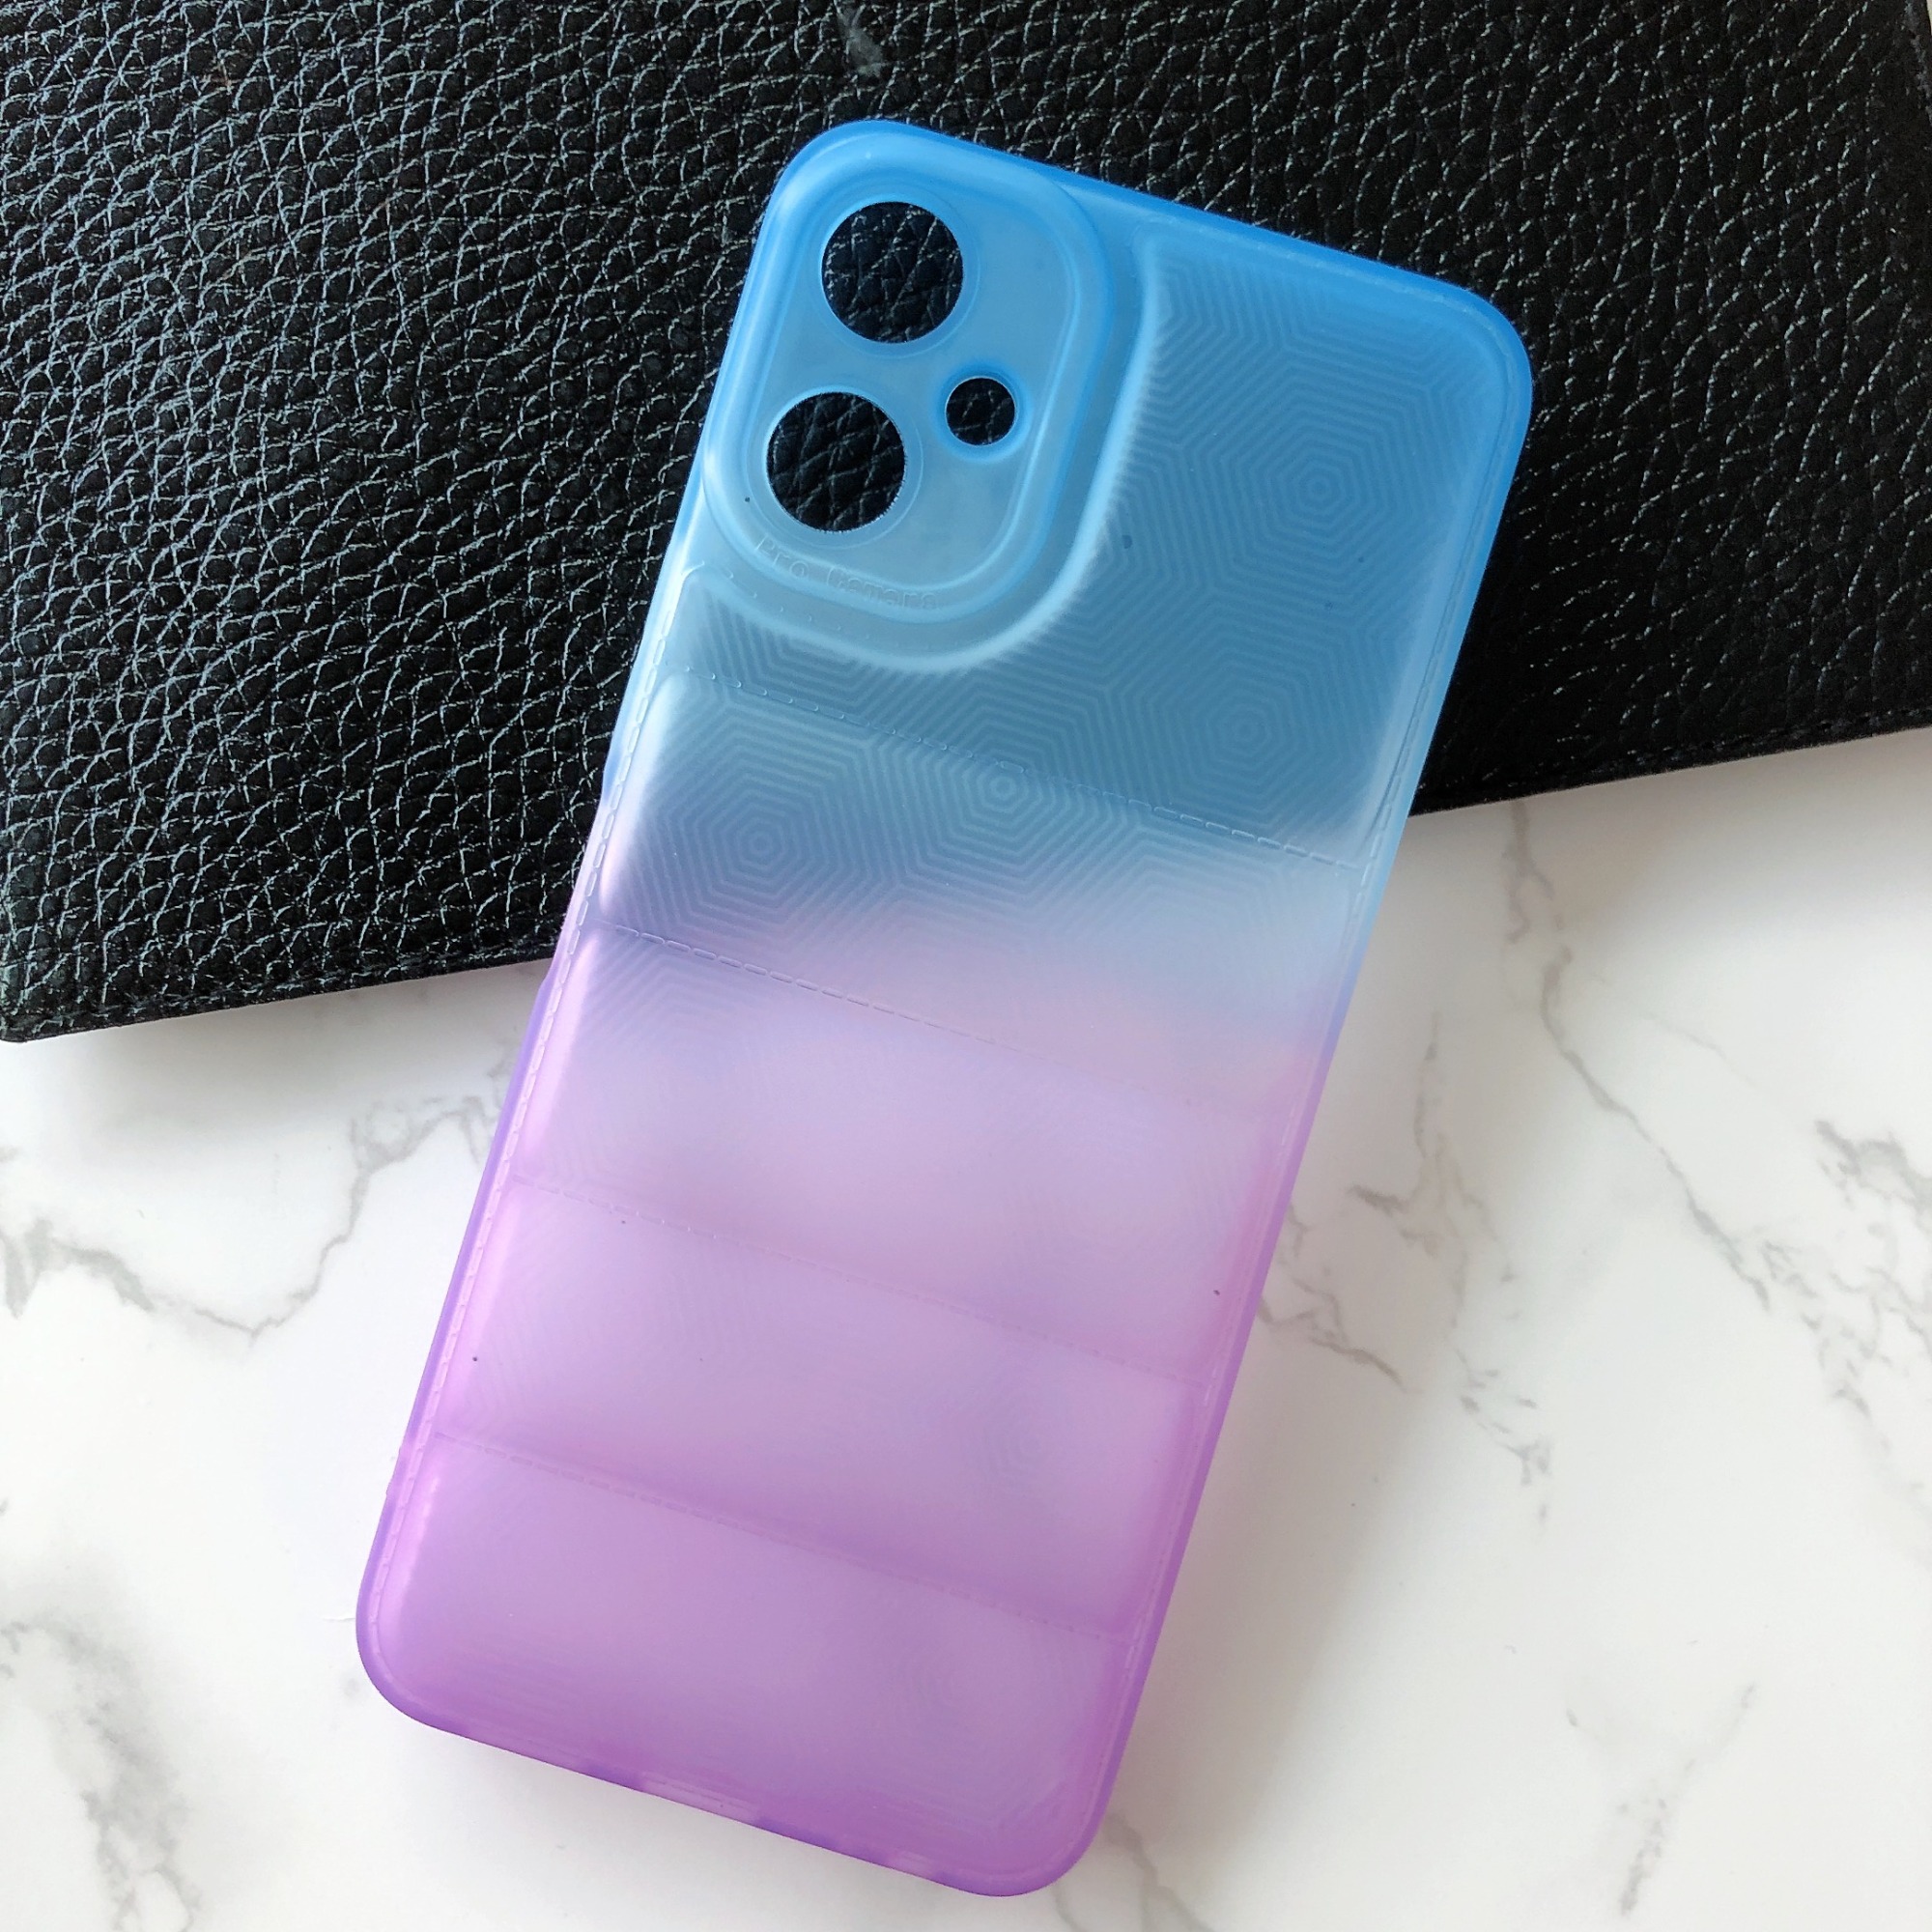 New design and hot sales phone case gradient color down jacket cover for ITEL A58LITE S18 S18PRO